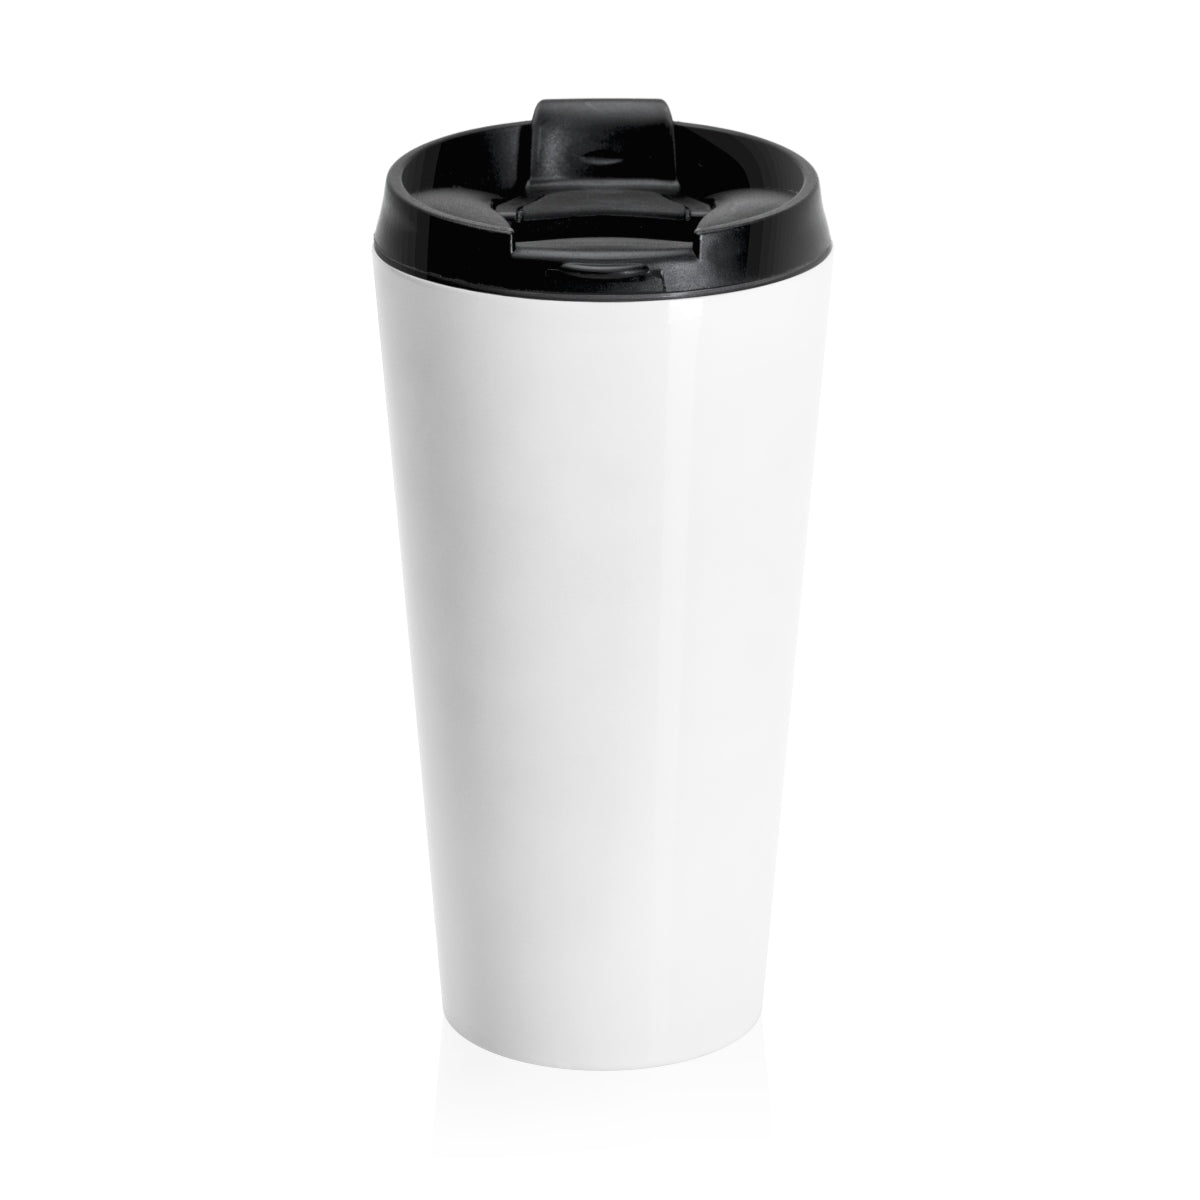 Old Mission Panthers White Stainless Steel Travel Mug - 15 oz.